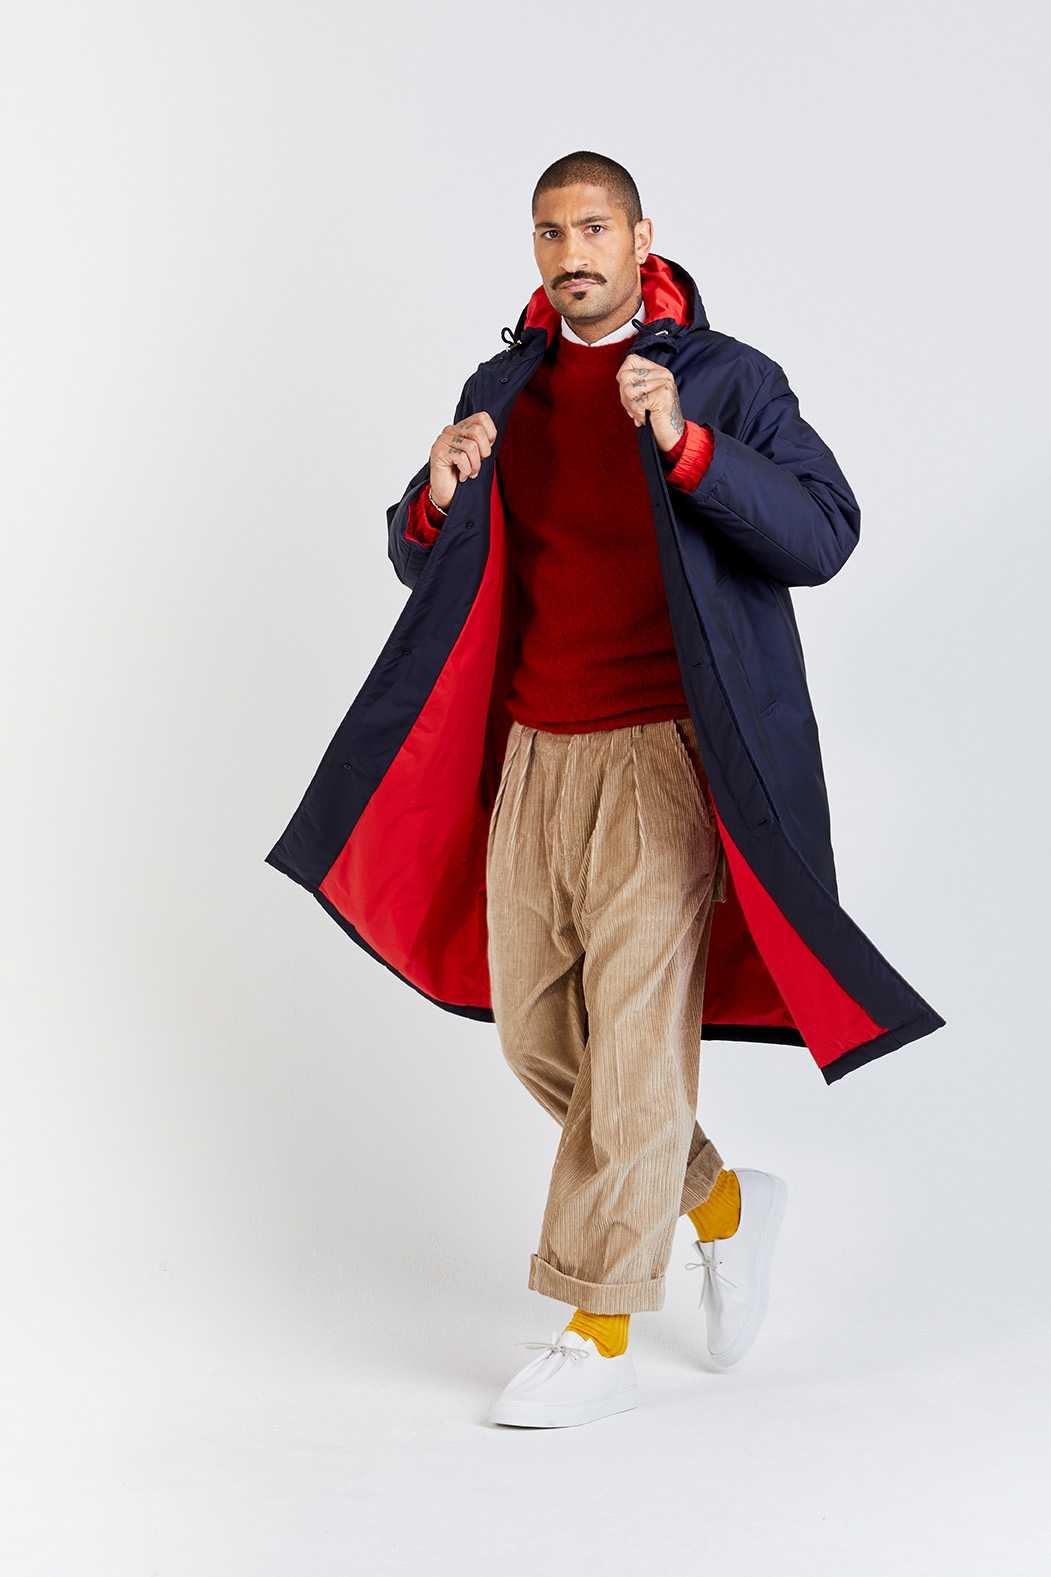 Mackintosh outife with blue coat, red jumper, and corduroy trousers